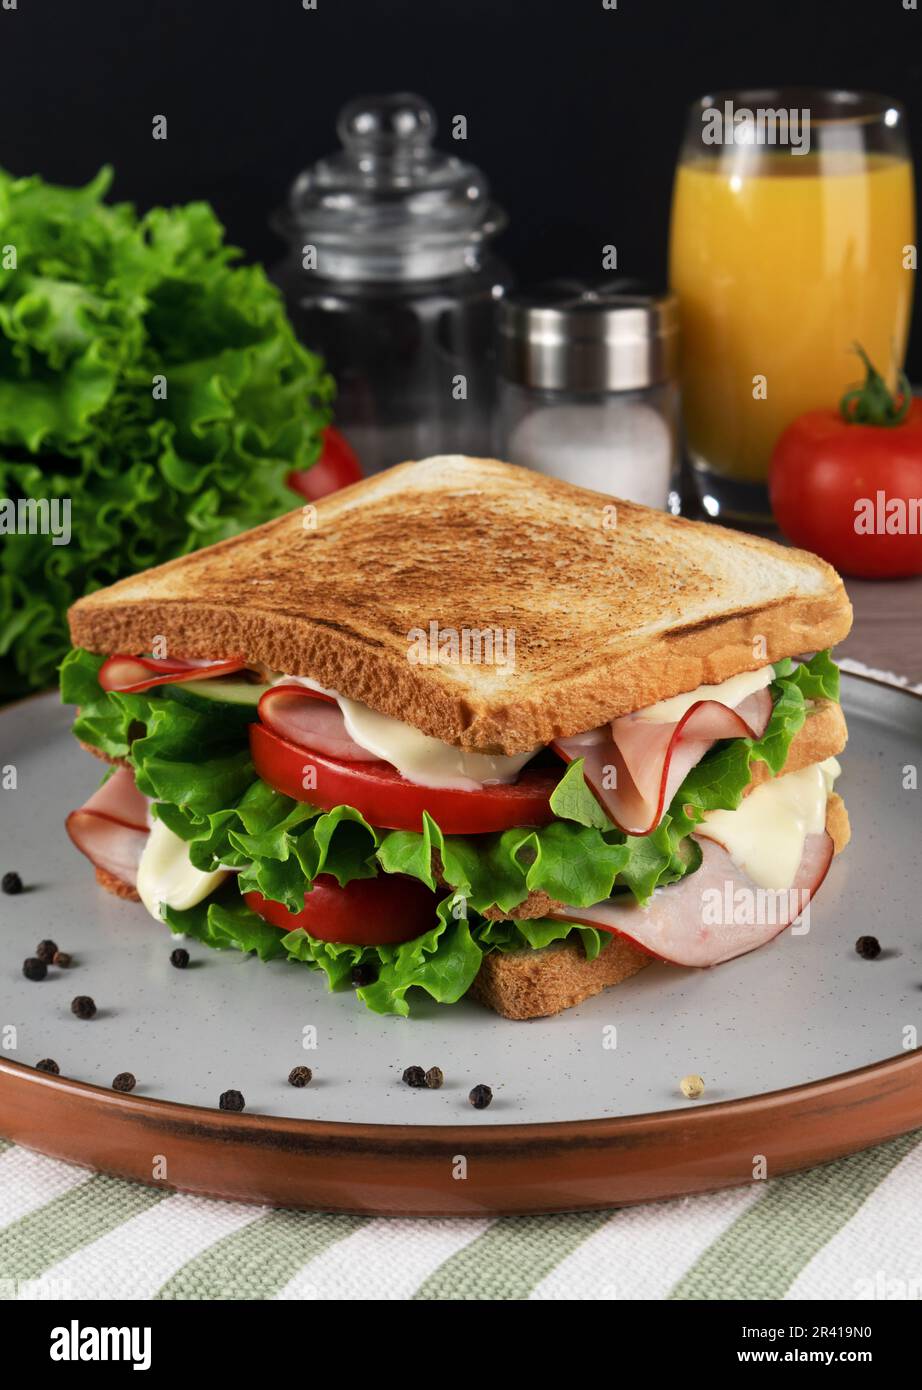 Sandwich with ham, cheese and vegetables on plate, on black background Stock Photo